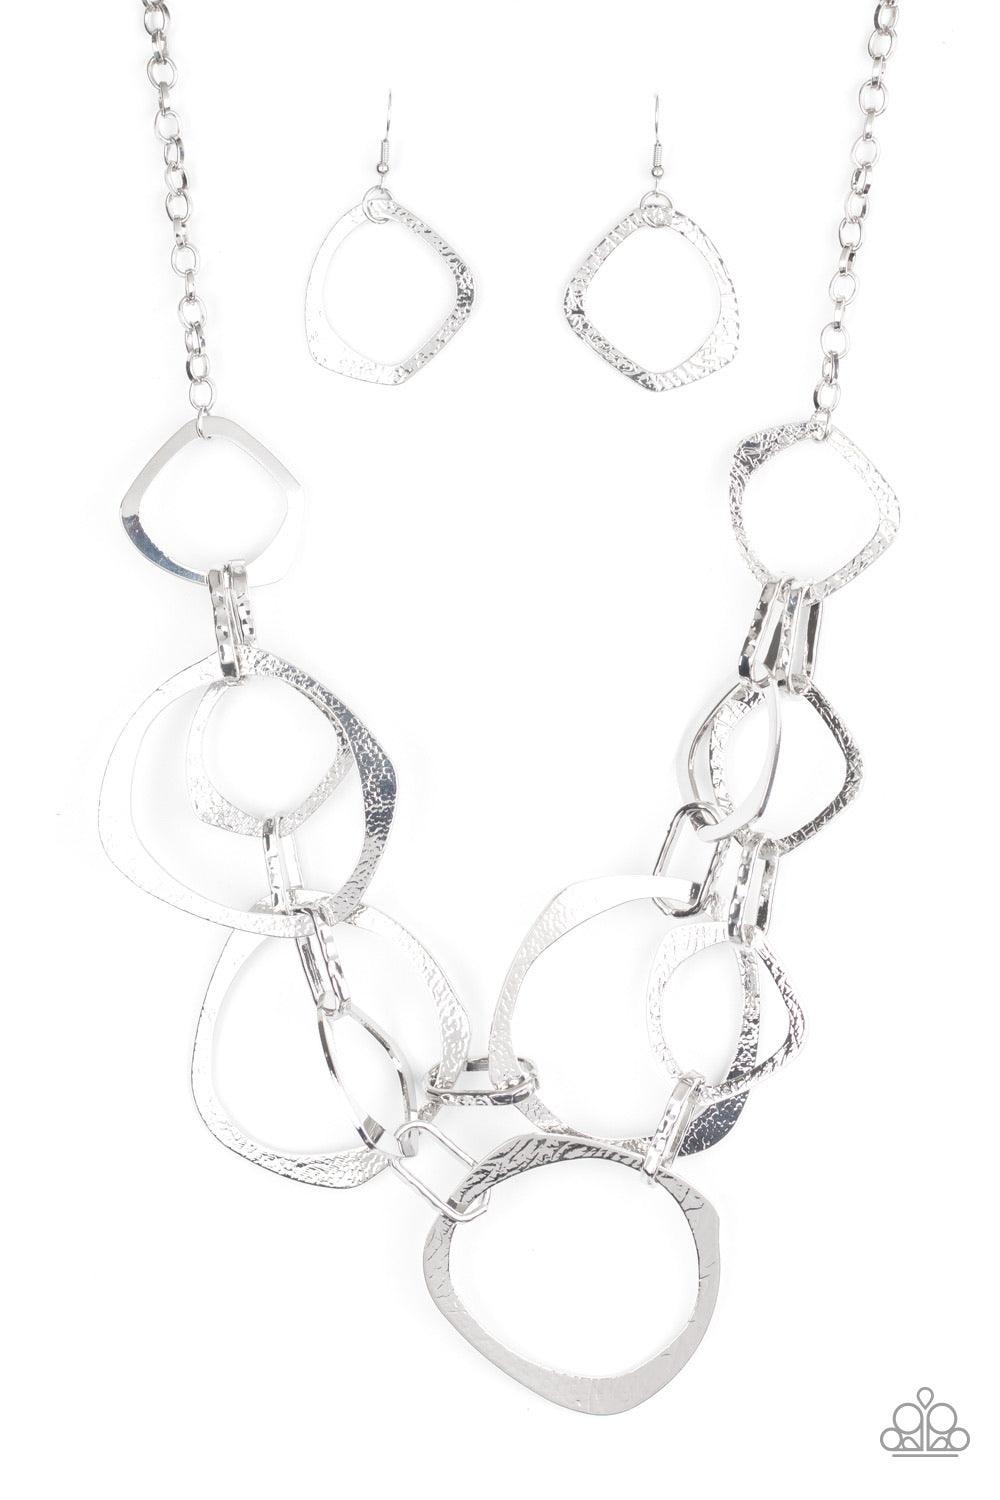 Paparazzi Accessories Salvage Yard - Silver Hammered in shimmery detail, oversized asymmetrical silver rings and gritty silver links boldly link below the collar in two dramatic rows for a sassy industrial look. Features an adjustable clasp closure. Sold